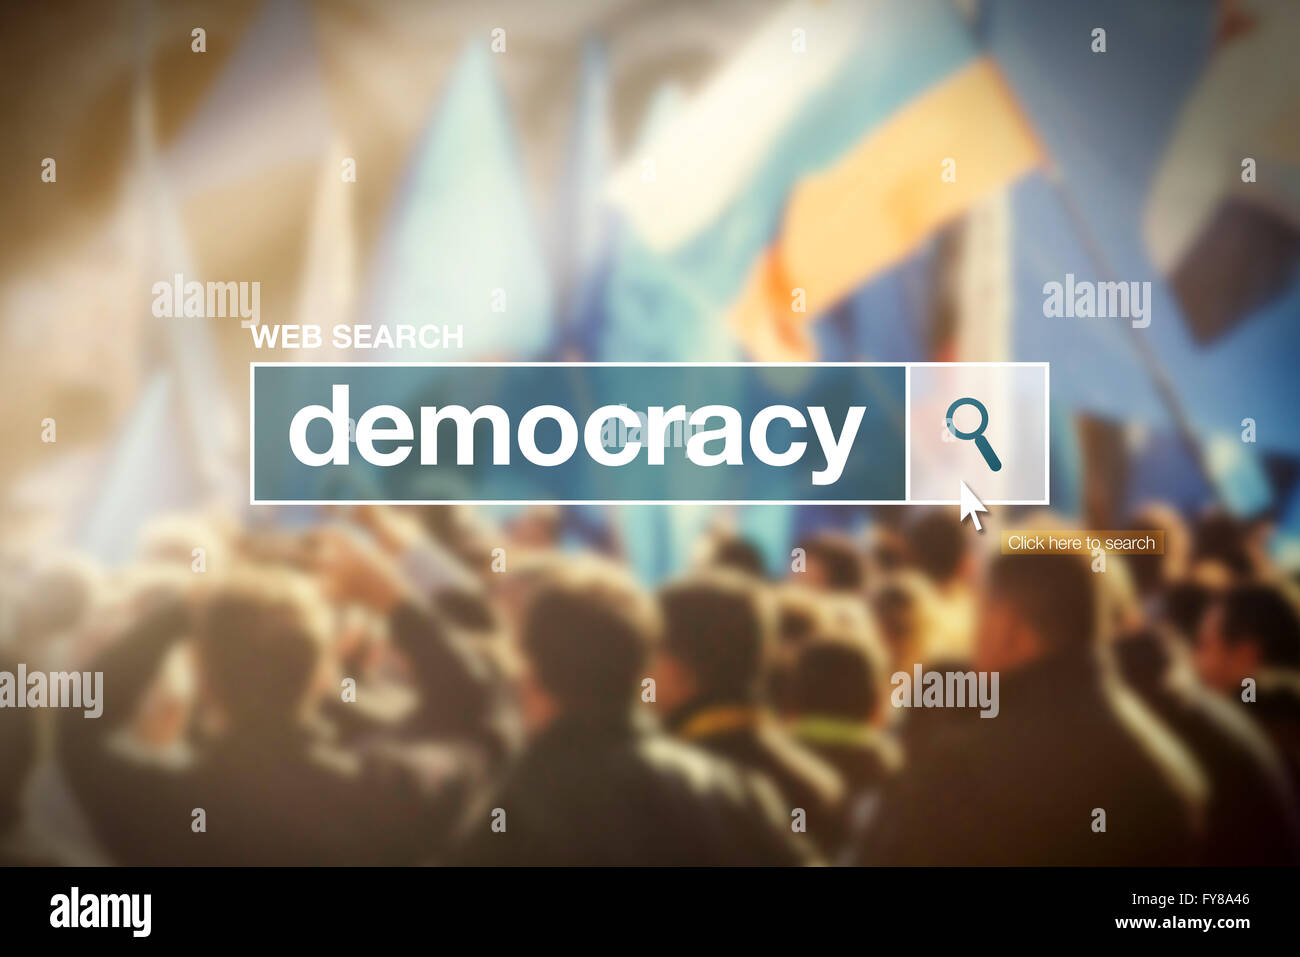 Web search bar glossary term - democracy definition in internet glossary. Stock Photo